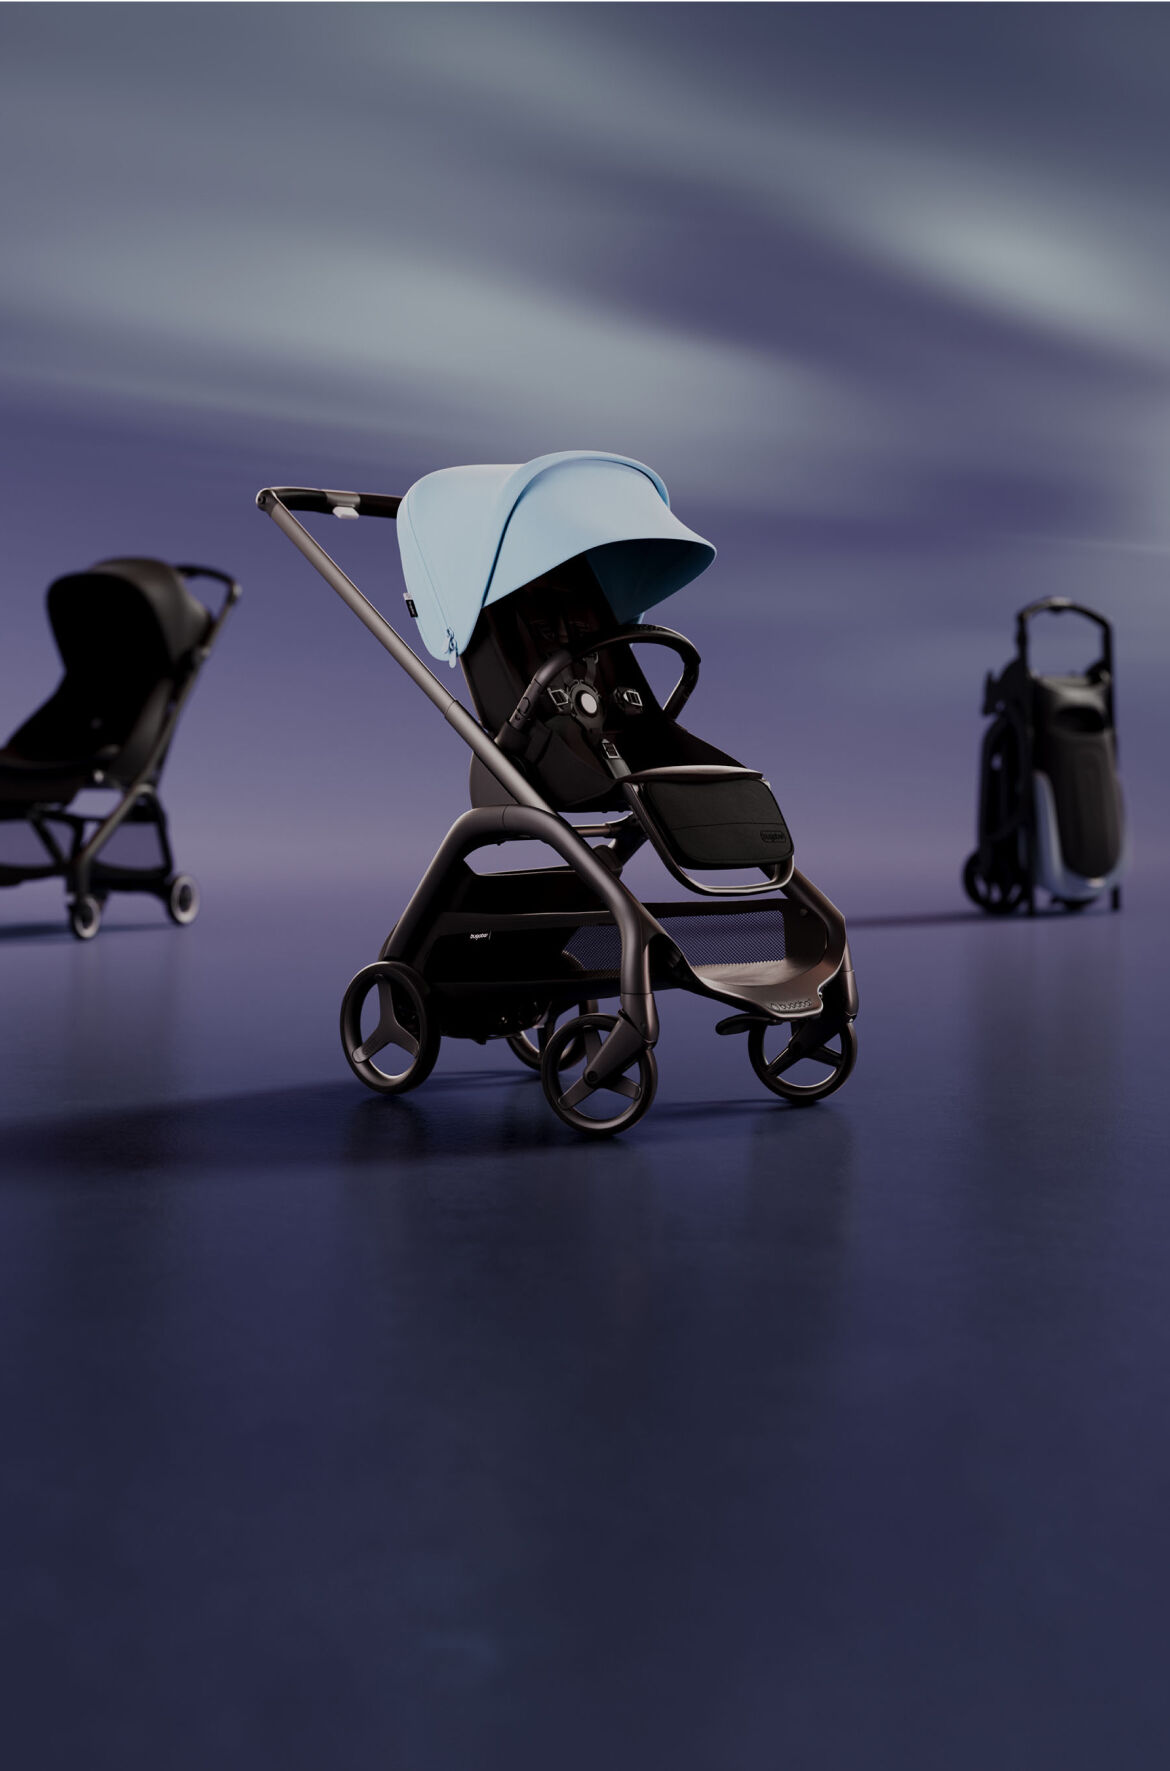 A lineup of 3 prams. At the front is a Bugaboo Dragonfly with Skyline Blue sun canopy. On the left is a Bugaboo Butterfly with Midnight Black fabrics. On the right is a self-standing folded Bugaboo Dragonfly.